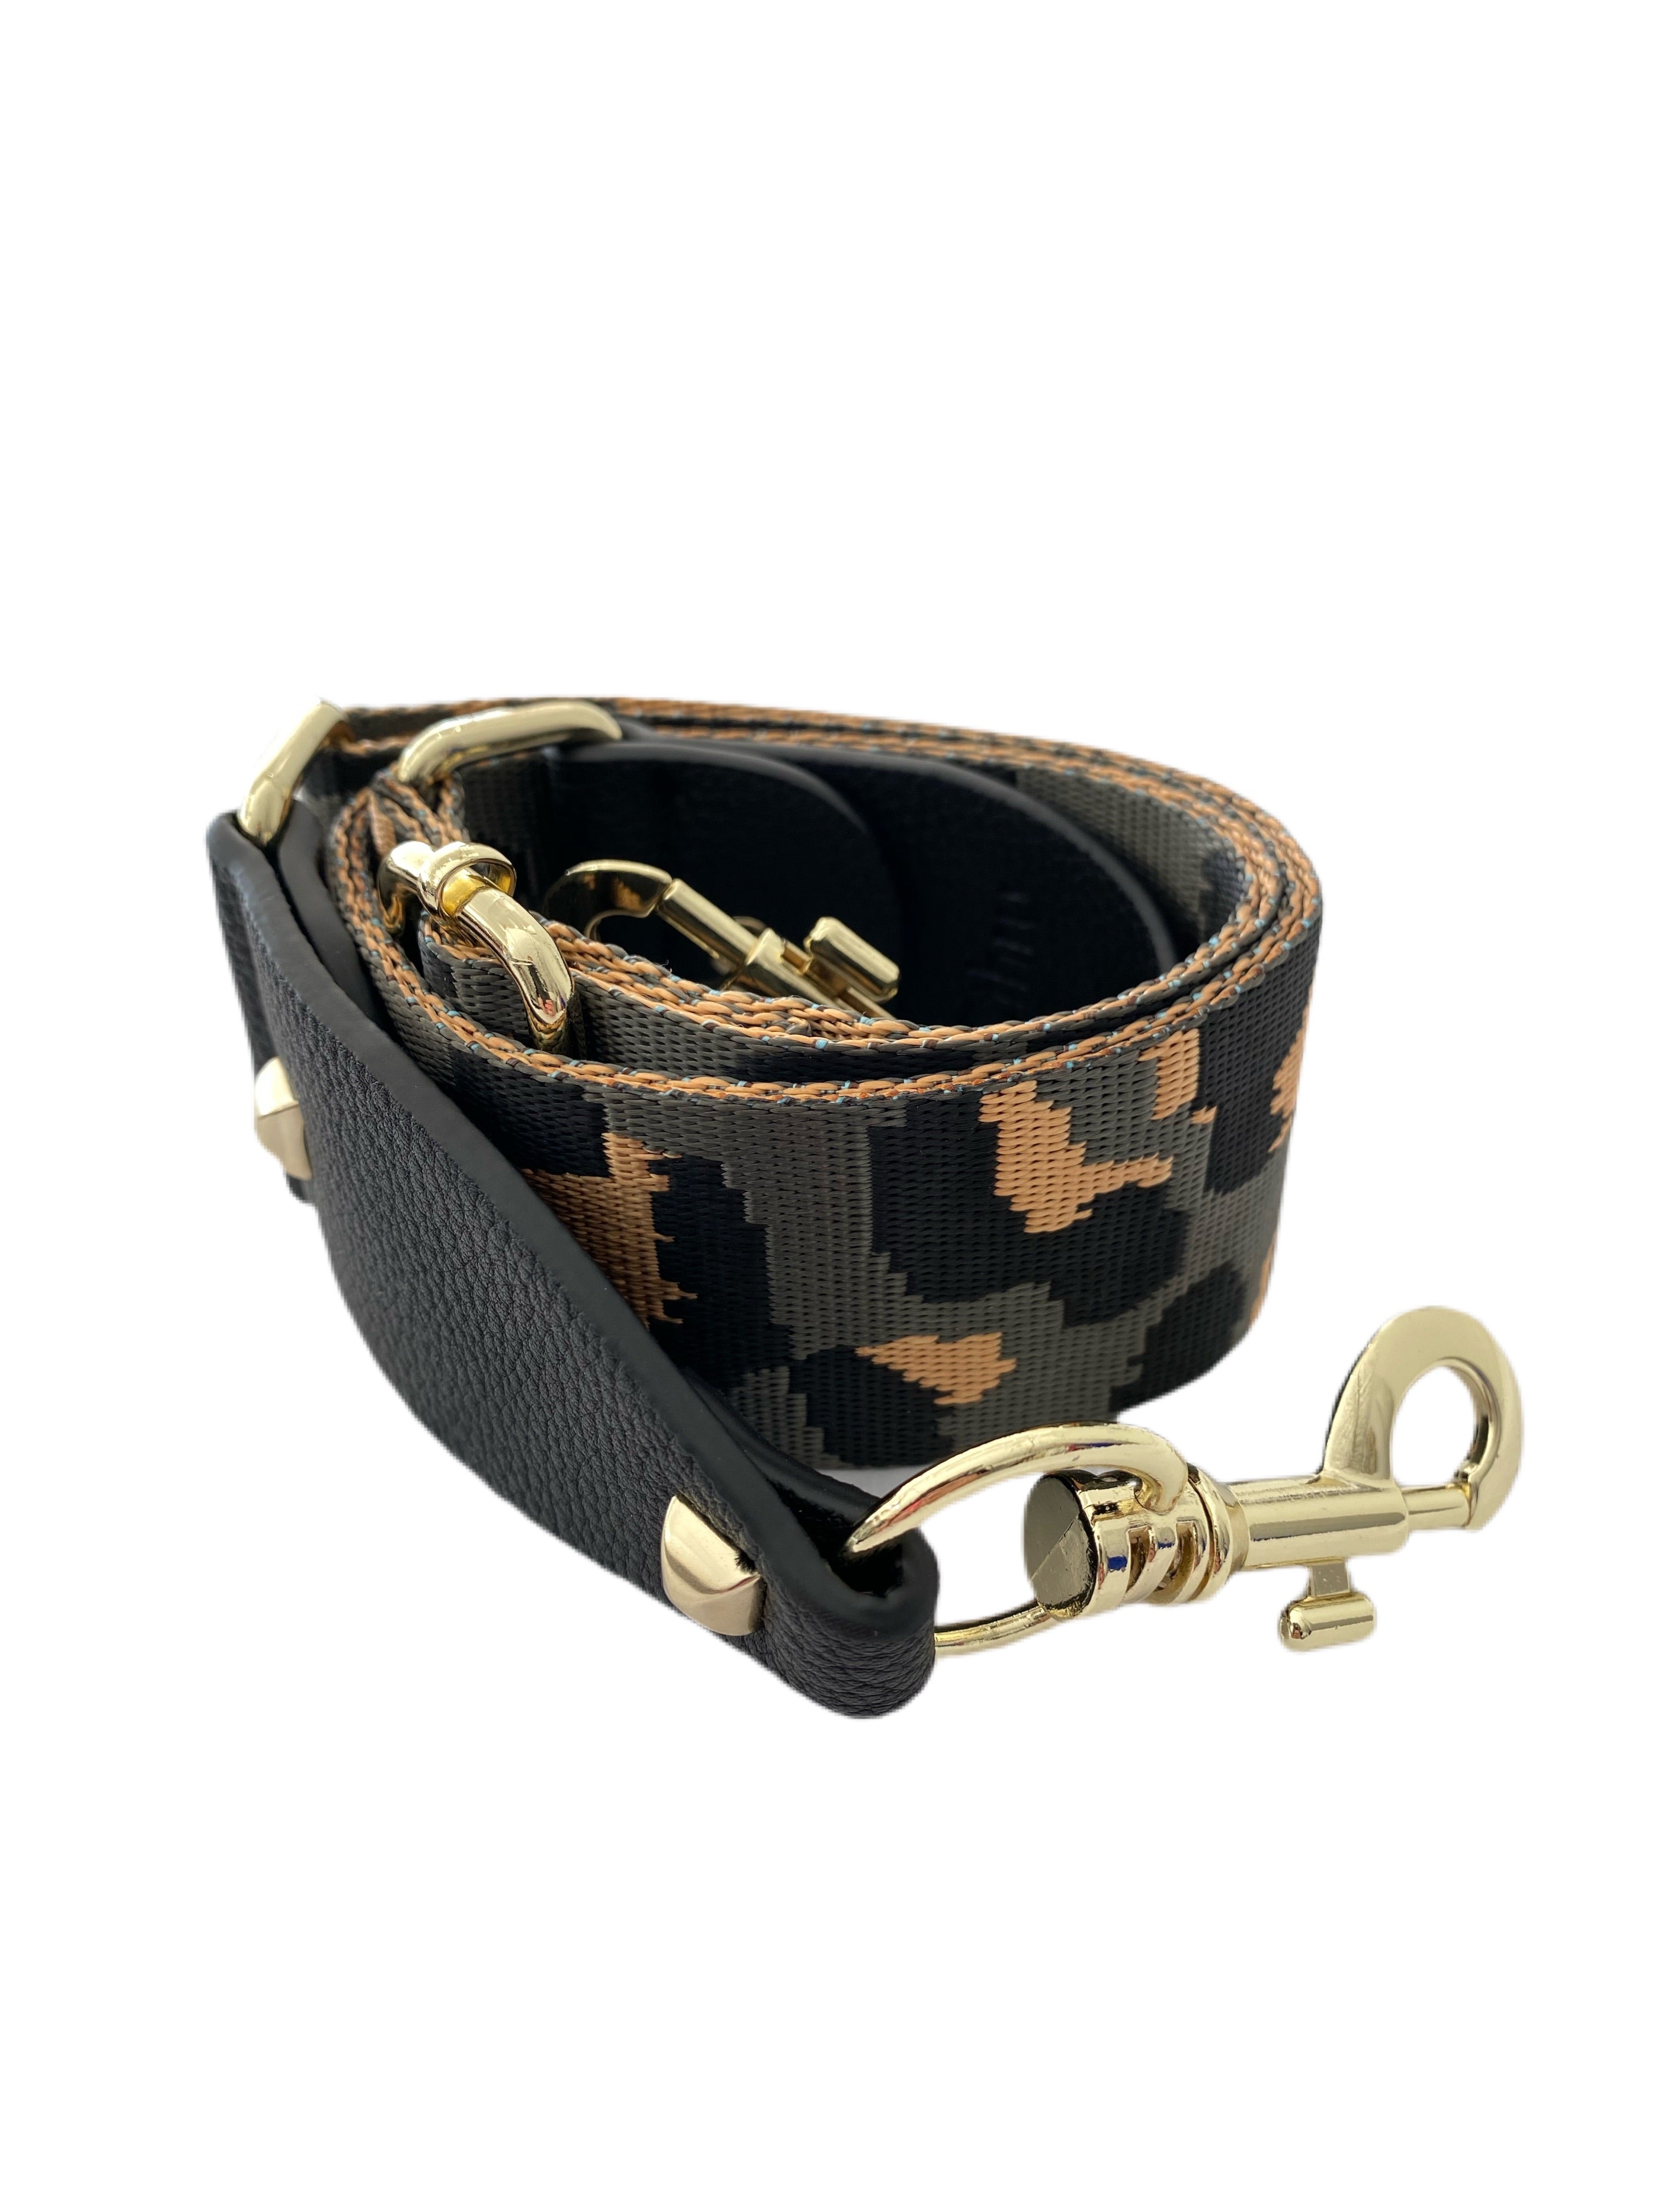 Adjustable Deluxe Leopard Strap with Studs